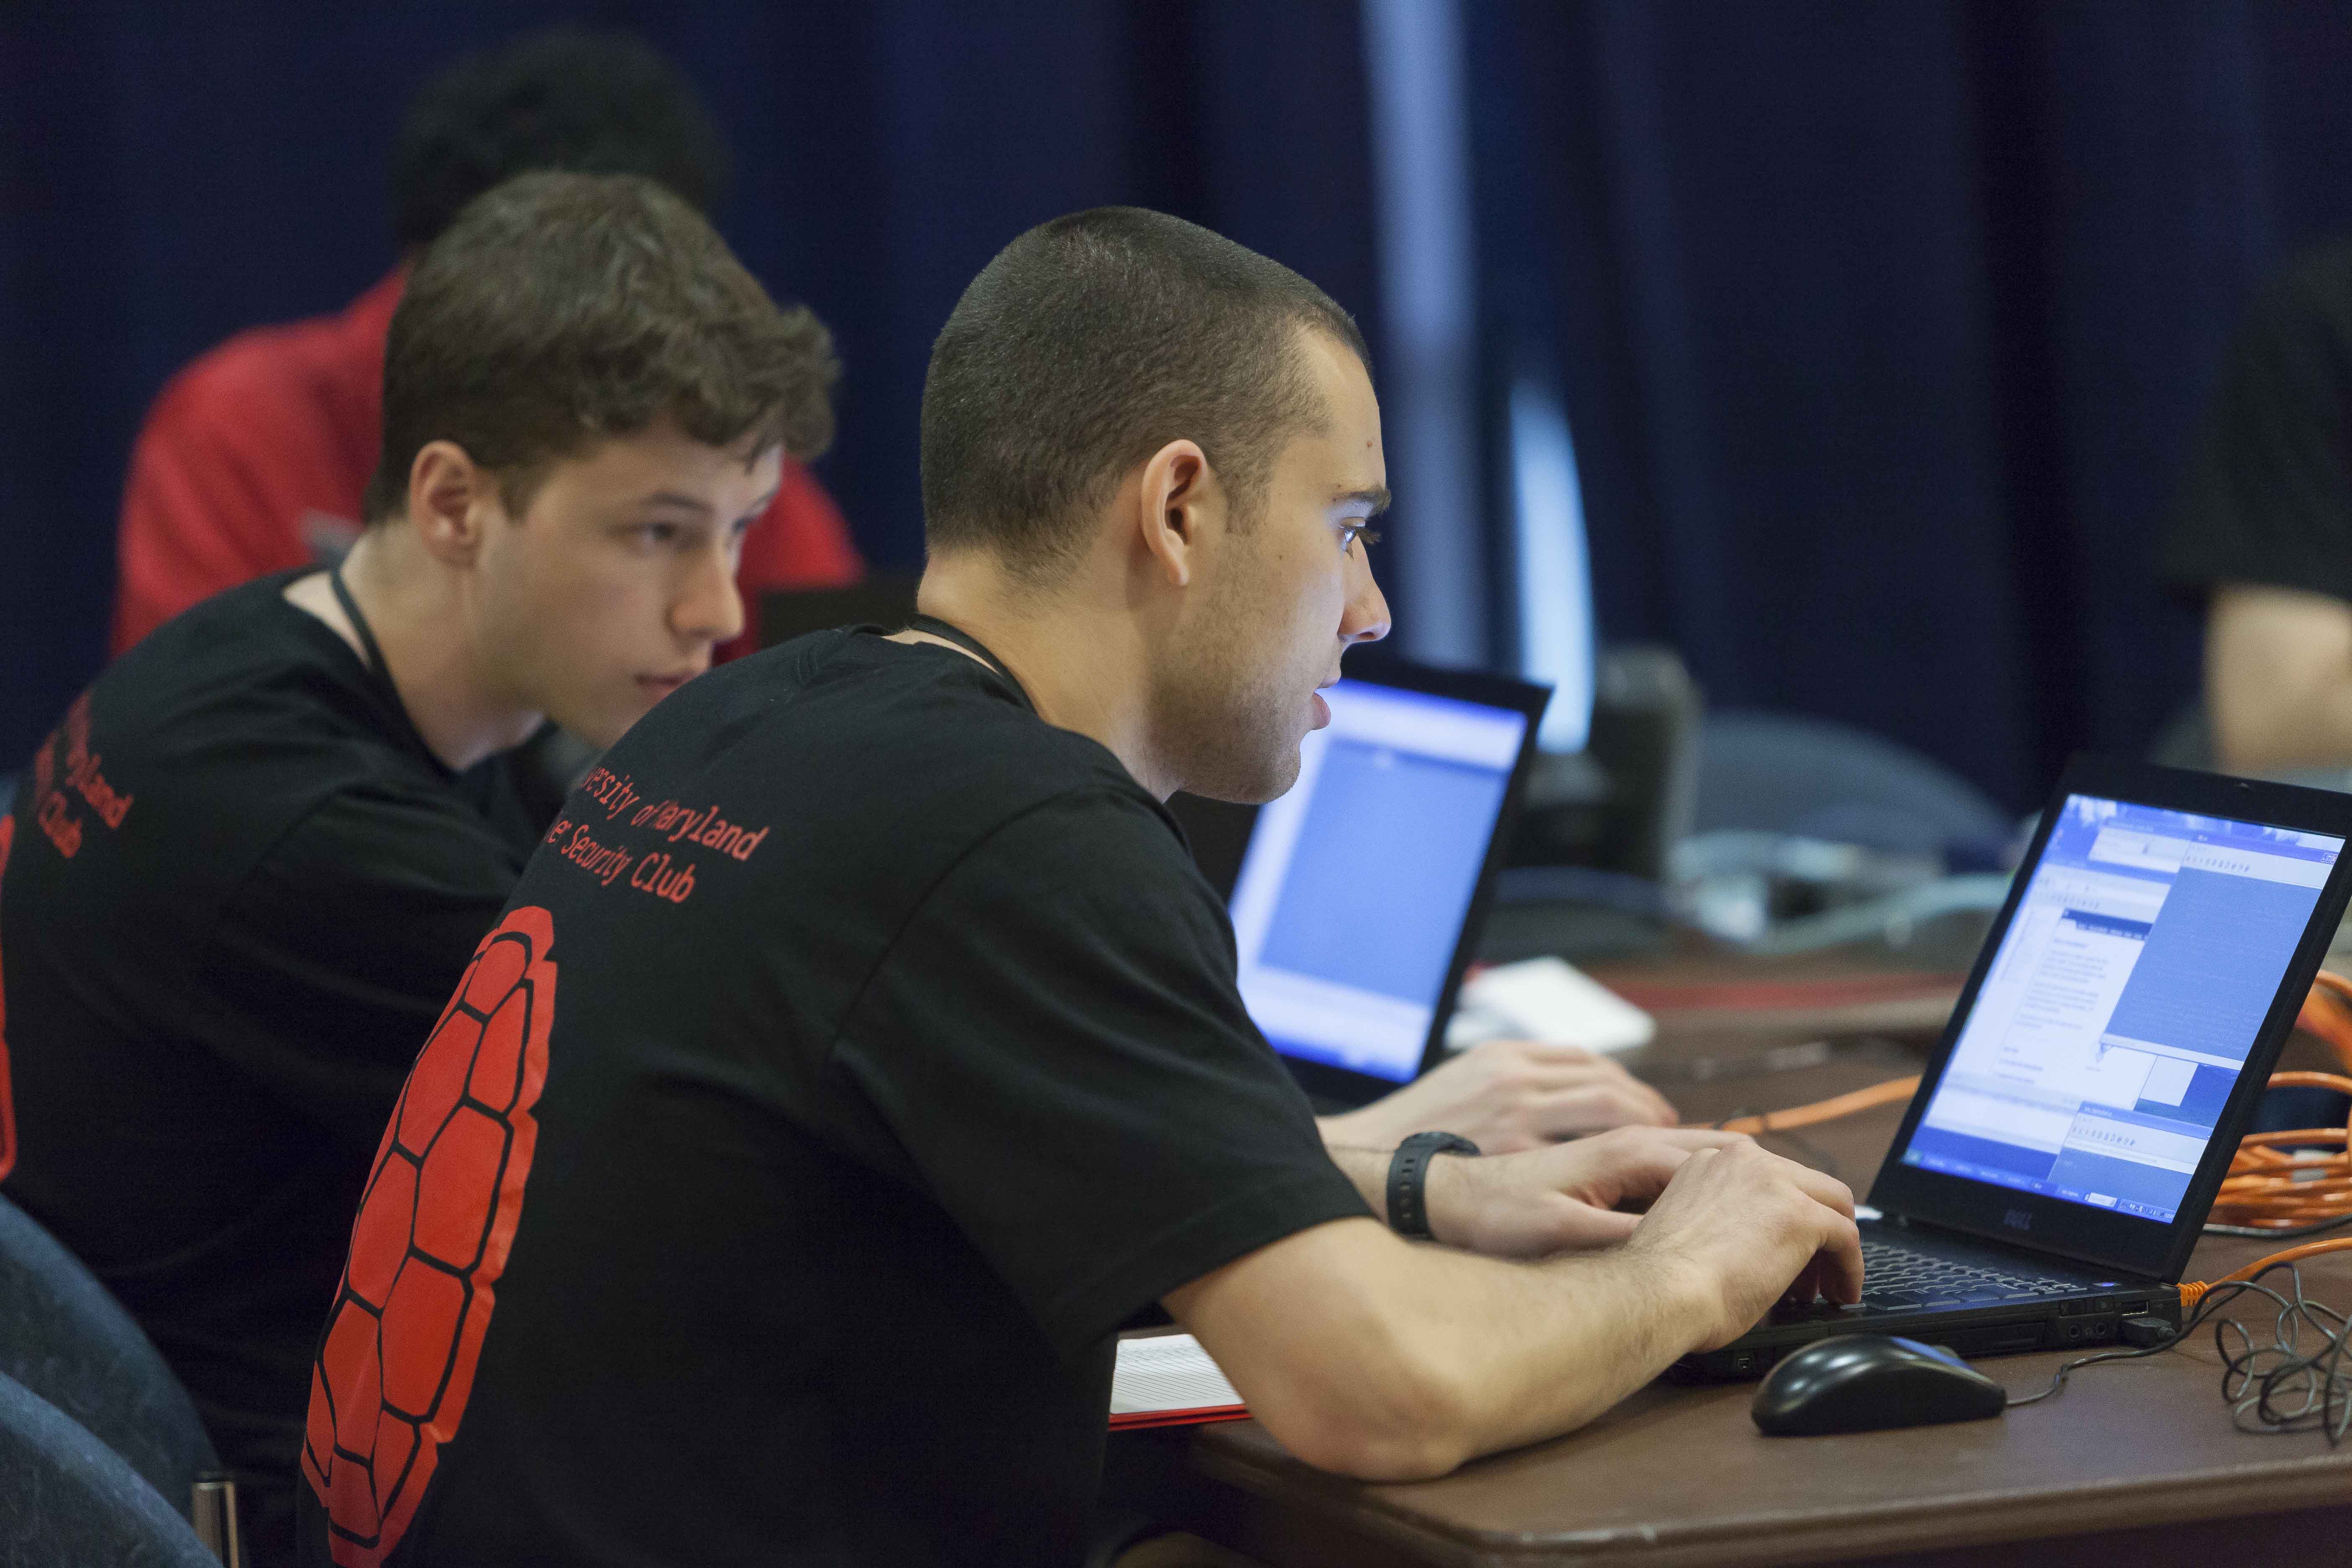 Students from the University of Maryland compete at the 2013 National CyberWatch Center Mid-Atlantic Regional Collegiate Cyber Defense Competition (CCDC) at APL